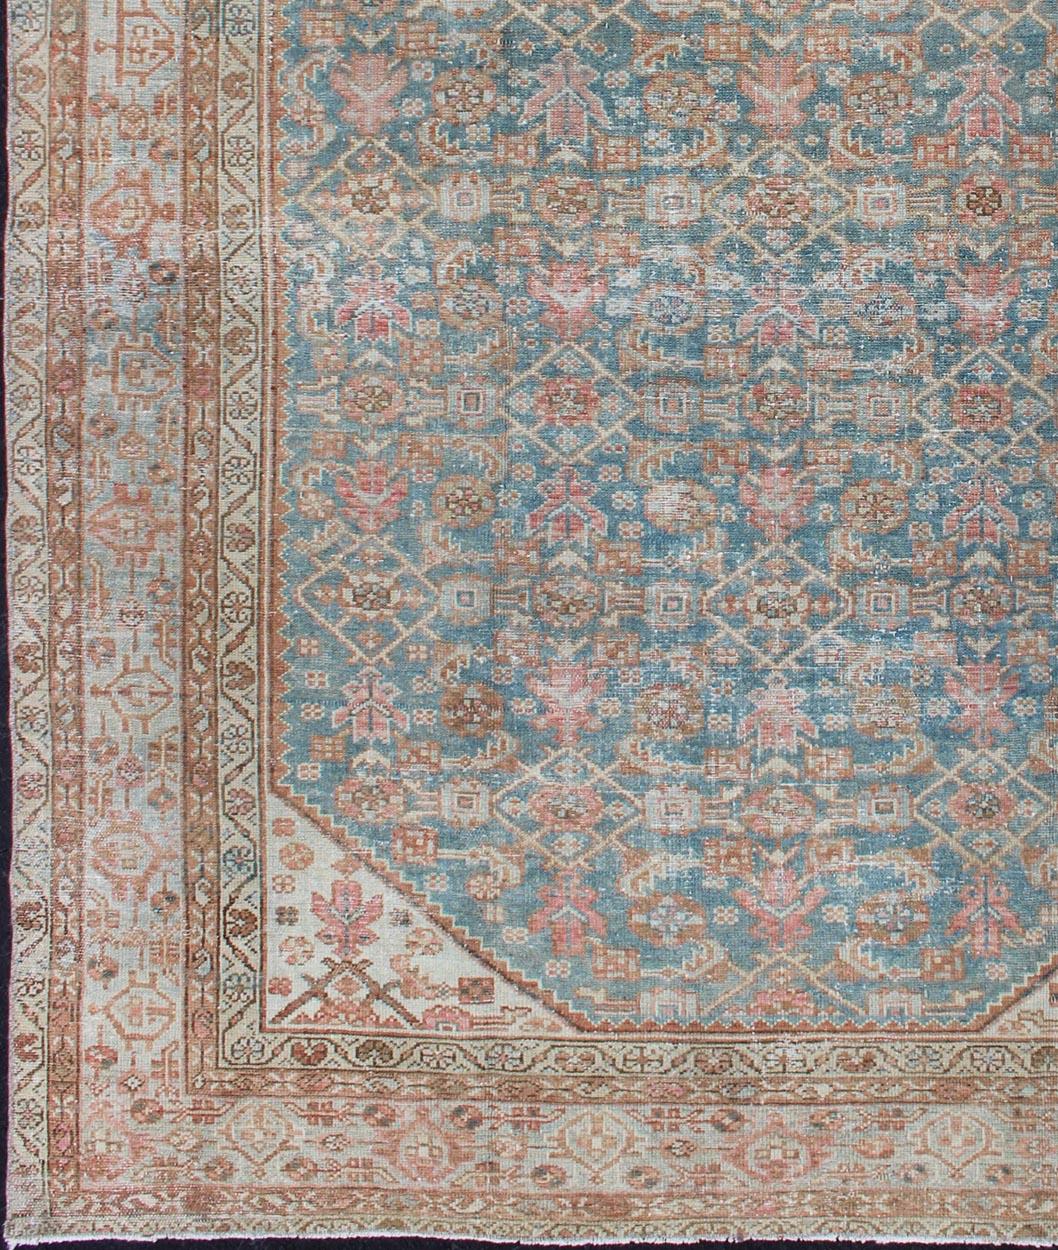 Persian rug in light blue and pink tones, rug en-1319, country of origin / type: Iran / Malayer, circa 1920

This beautiful antique Malayer rug features a central field adorned with a repetitive arrangement of small motifs and four small cornices.